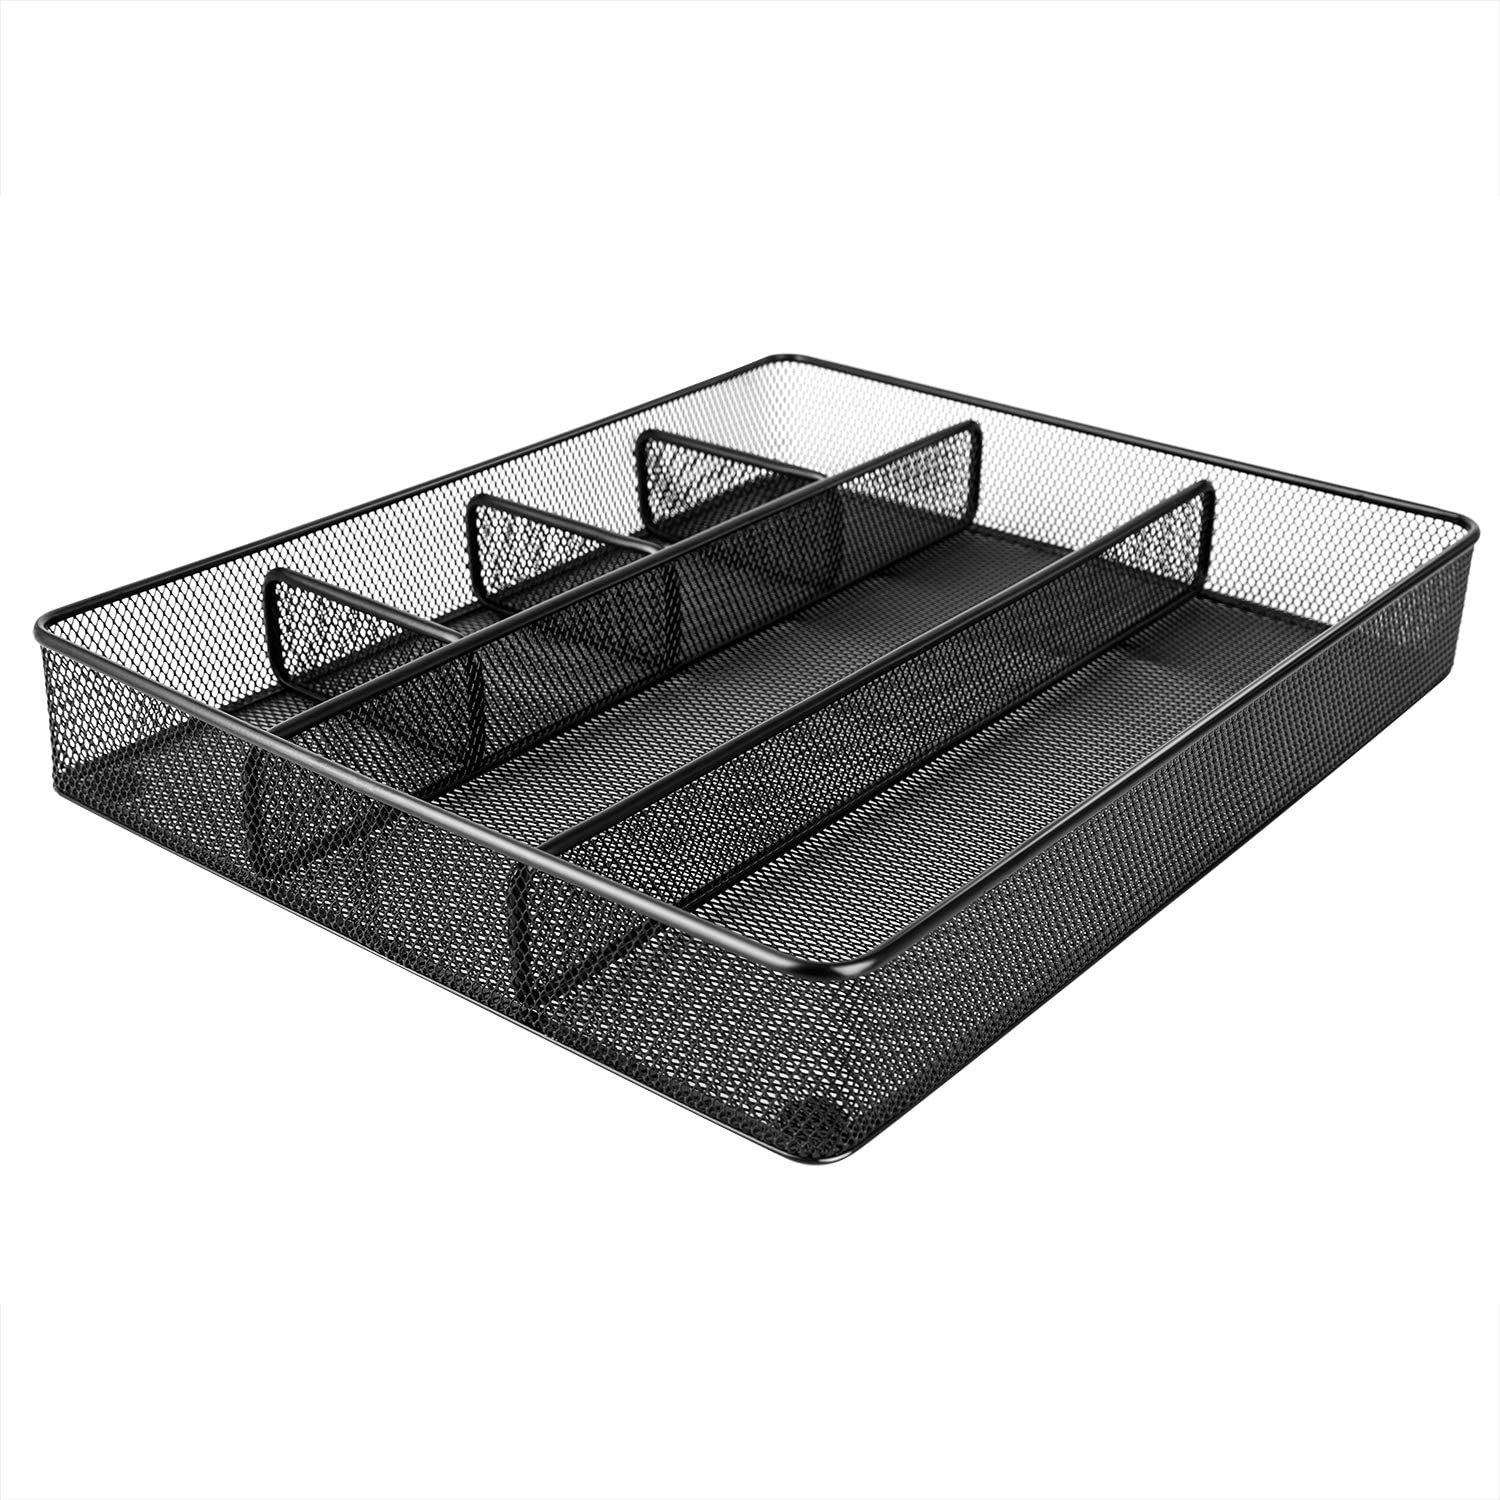 Basics Mesh Desk Organizer with Sliding Drawer, Double Tray and 5  Upright Sections, Black